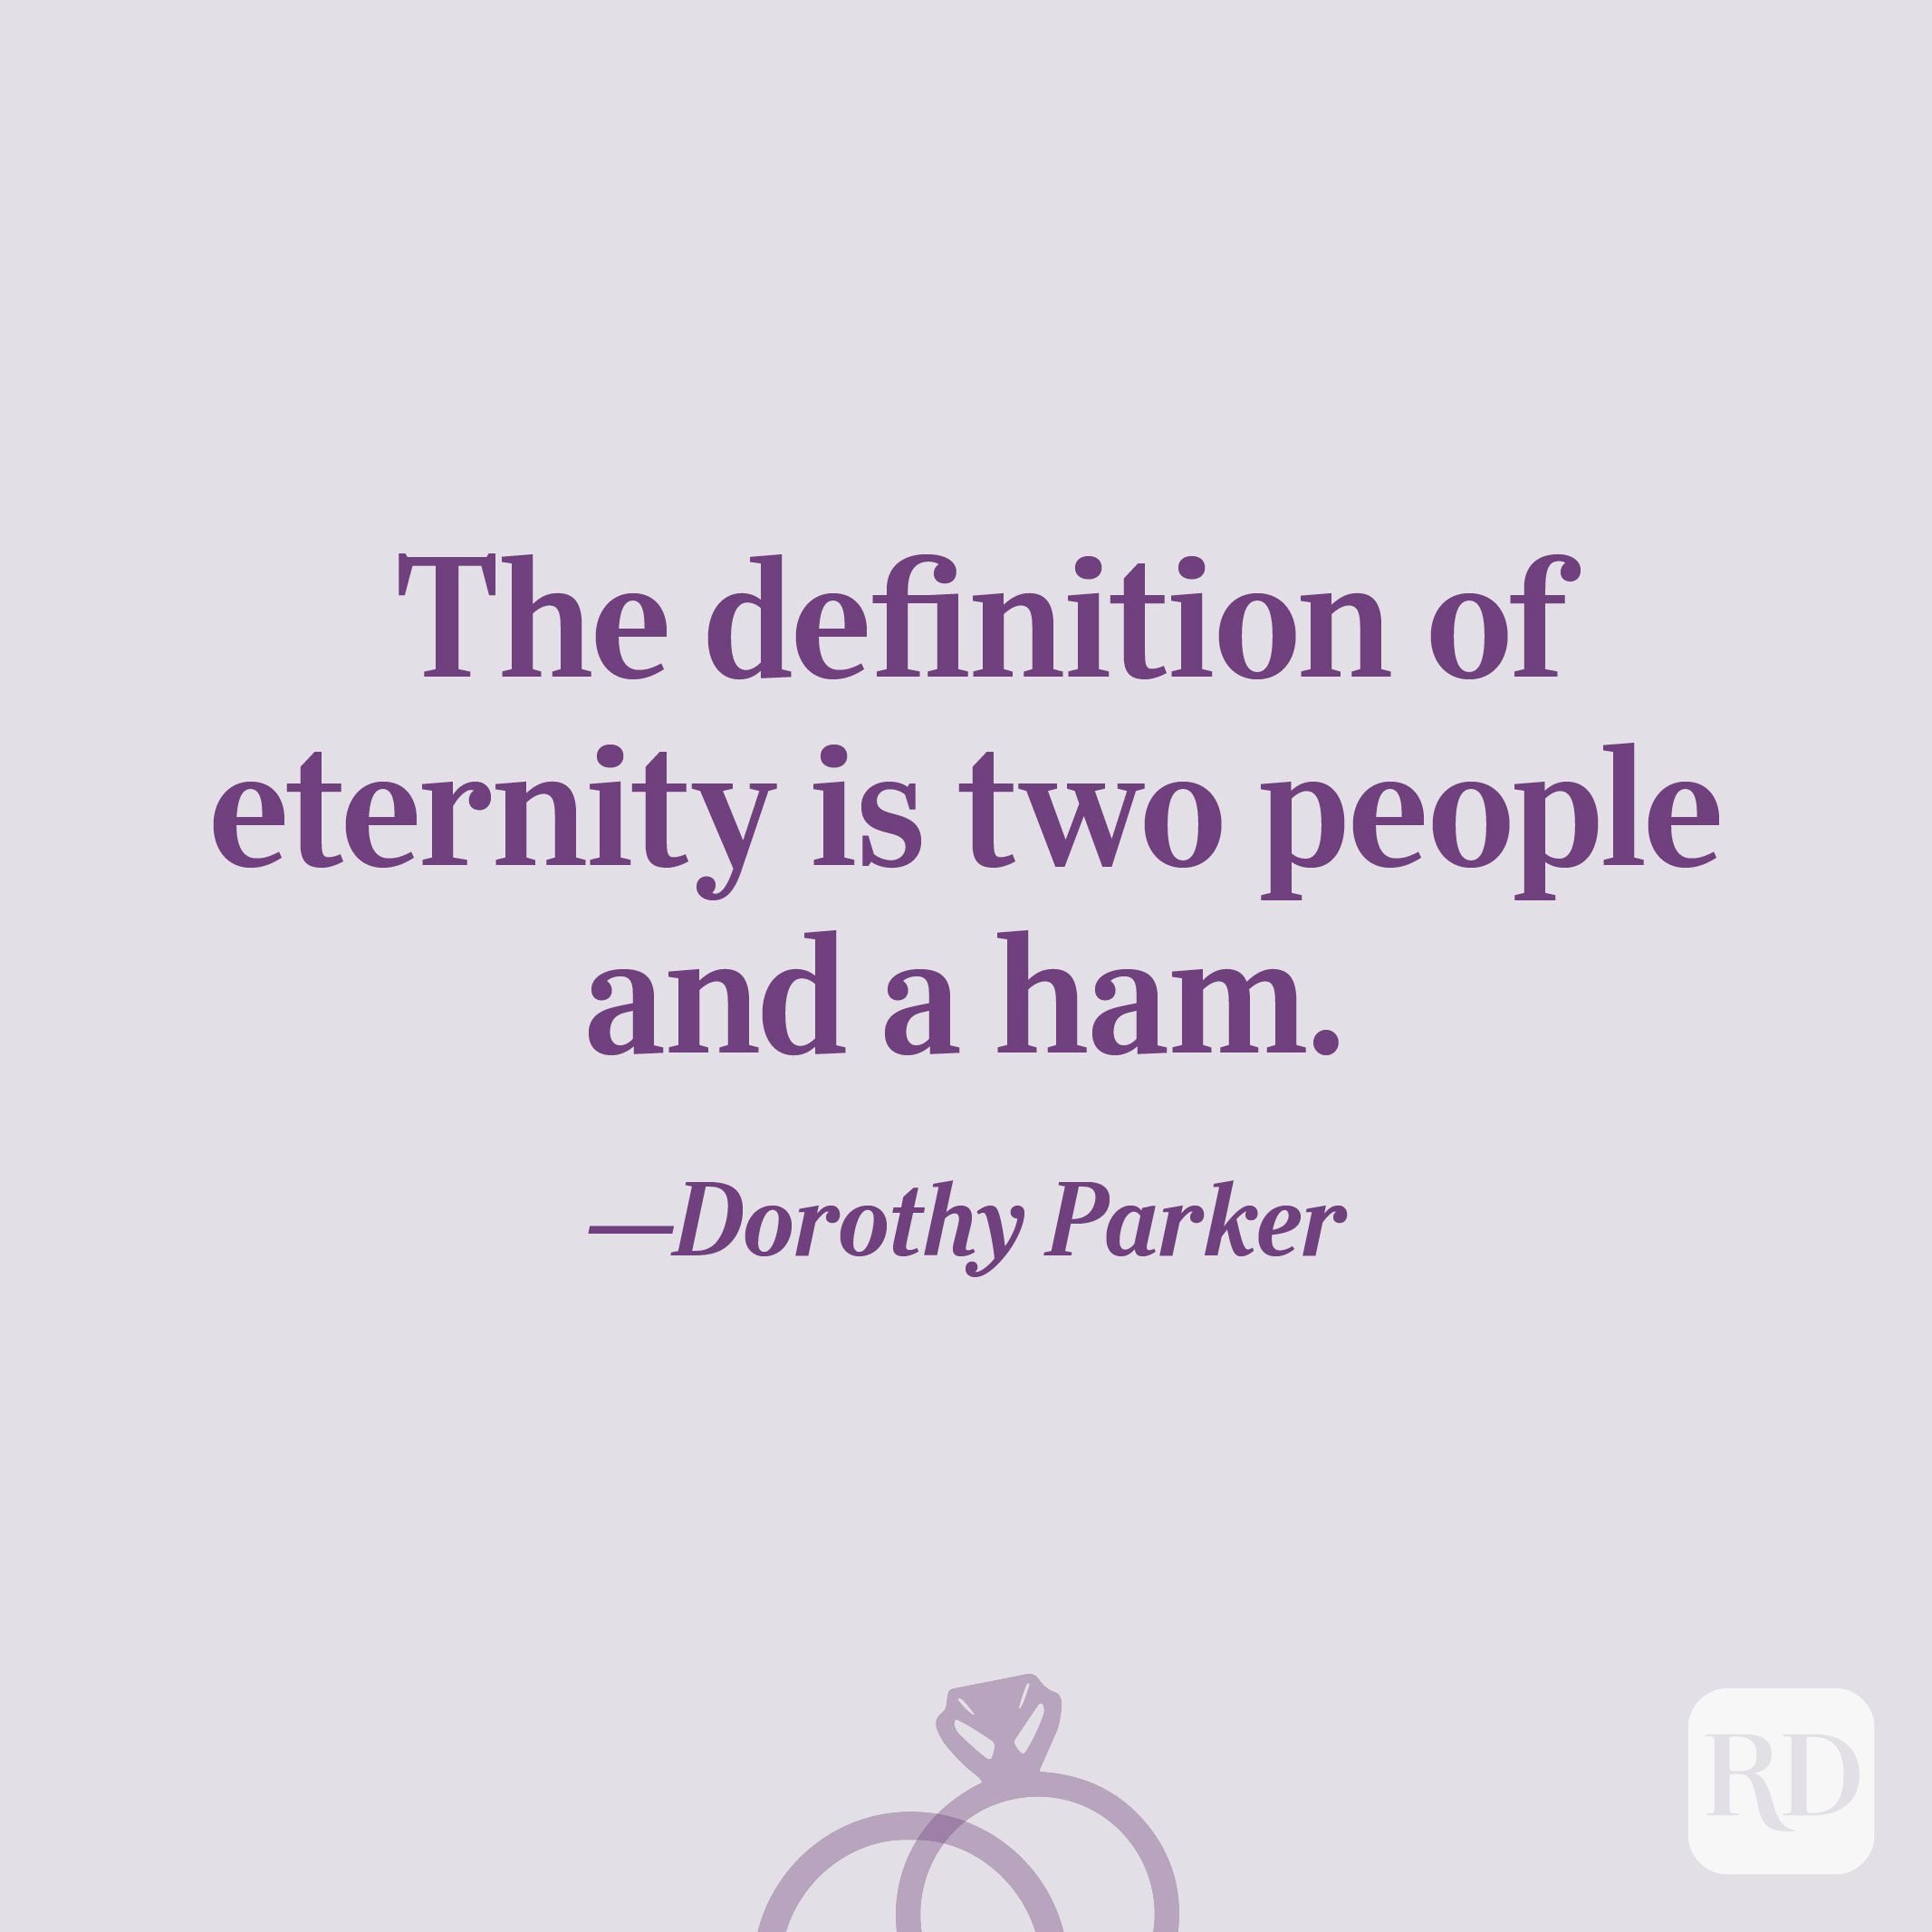 “The definition of eternity is two people and a ham.”—Dorothy Parker